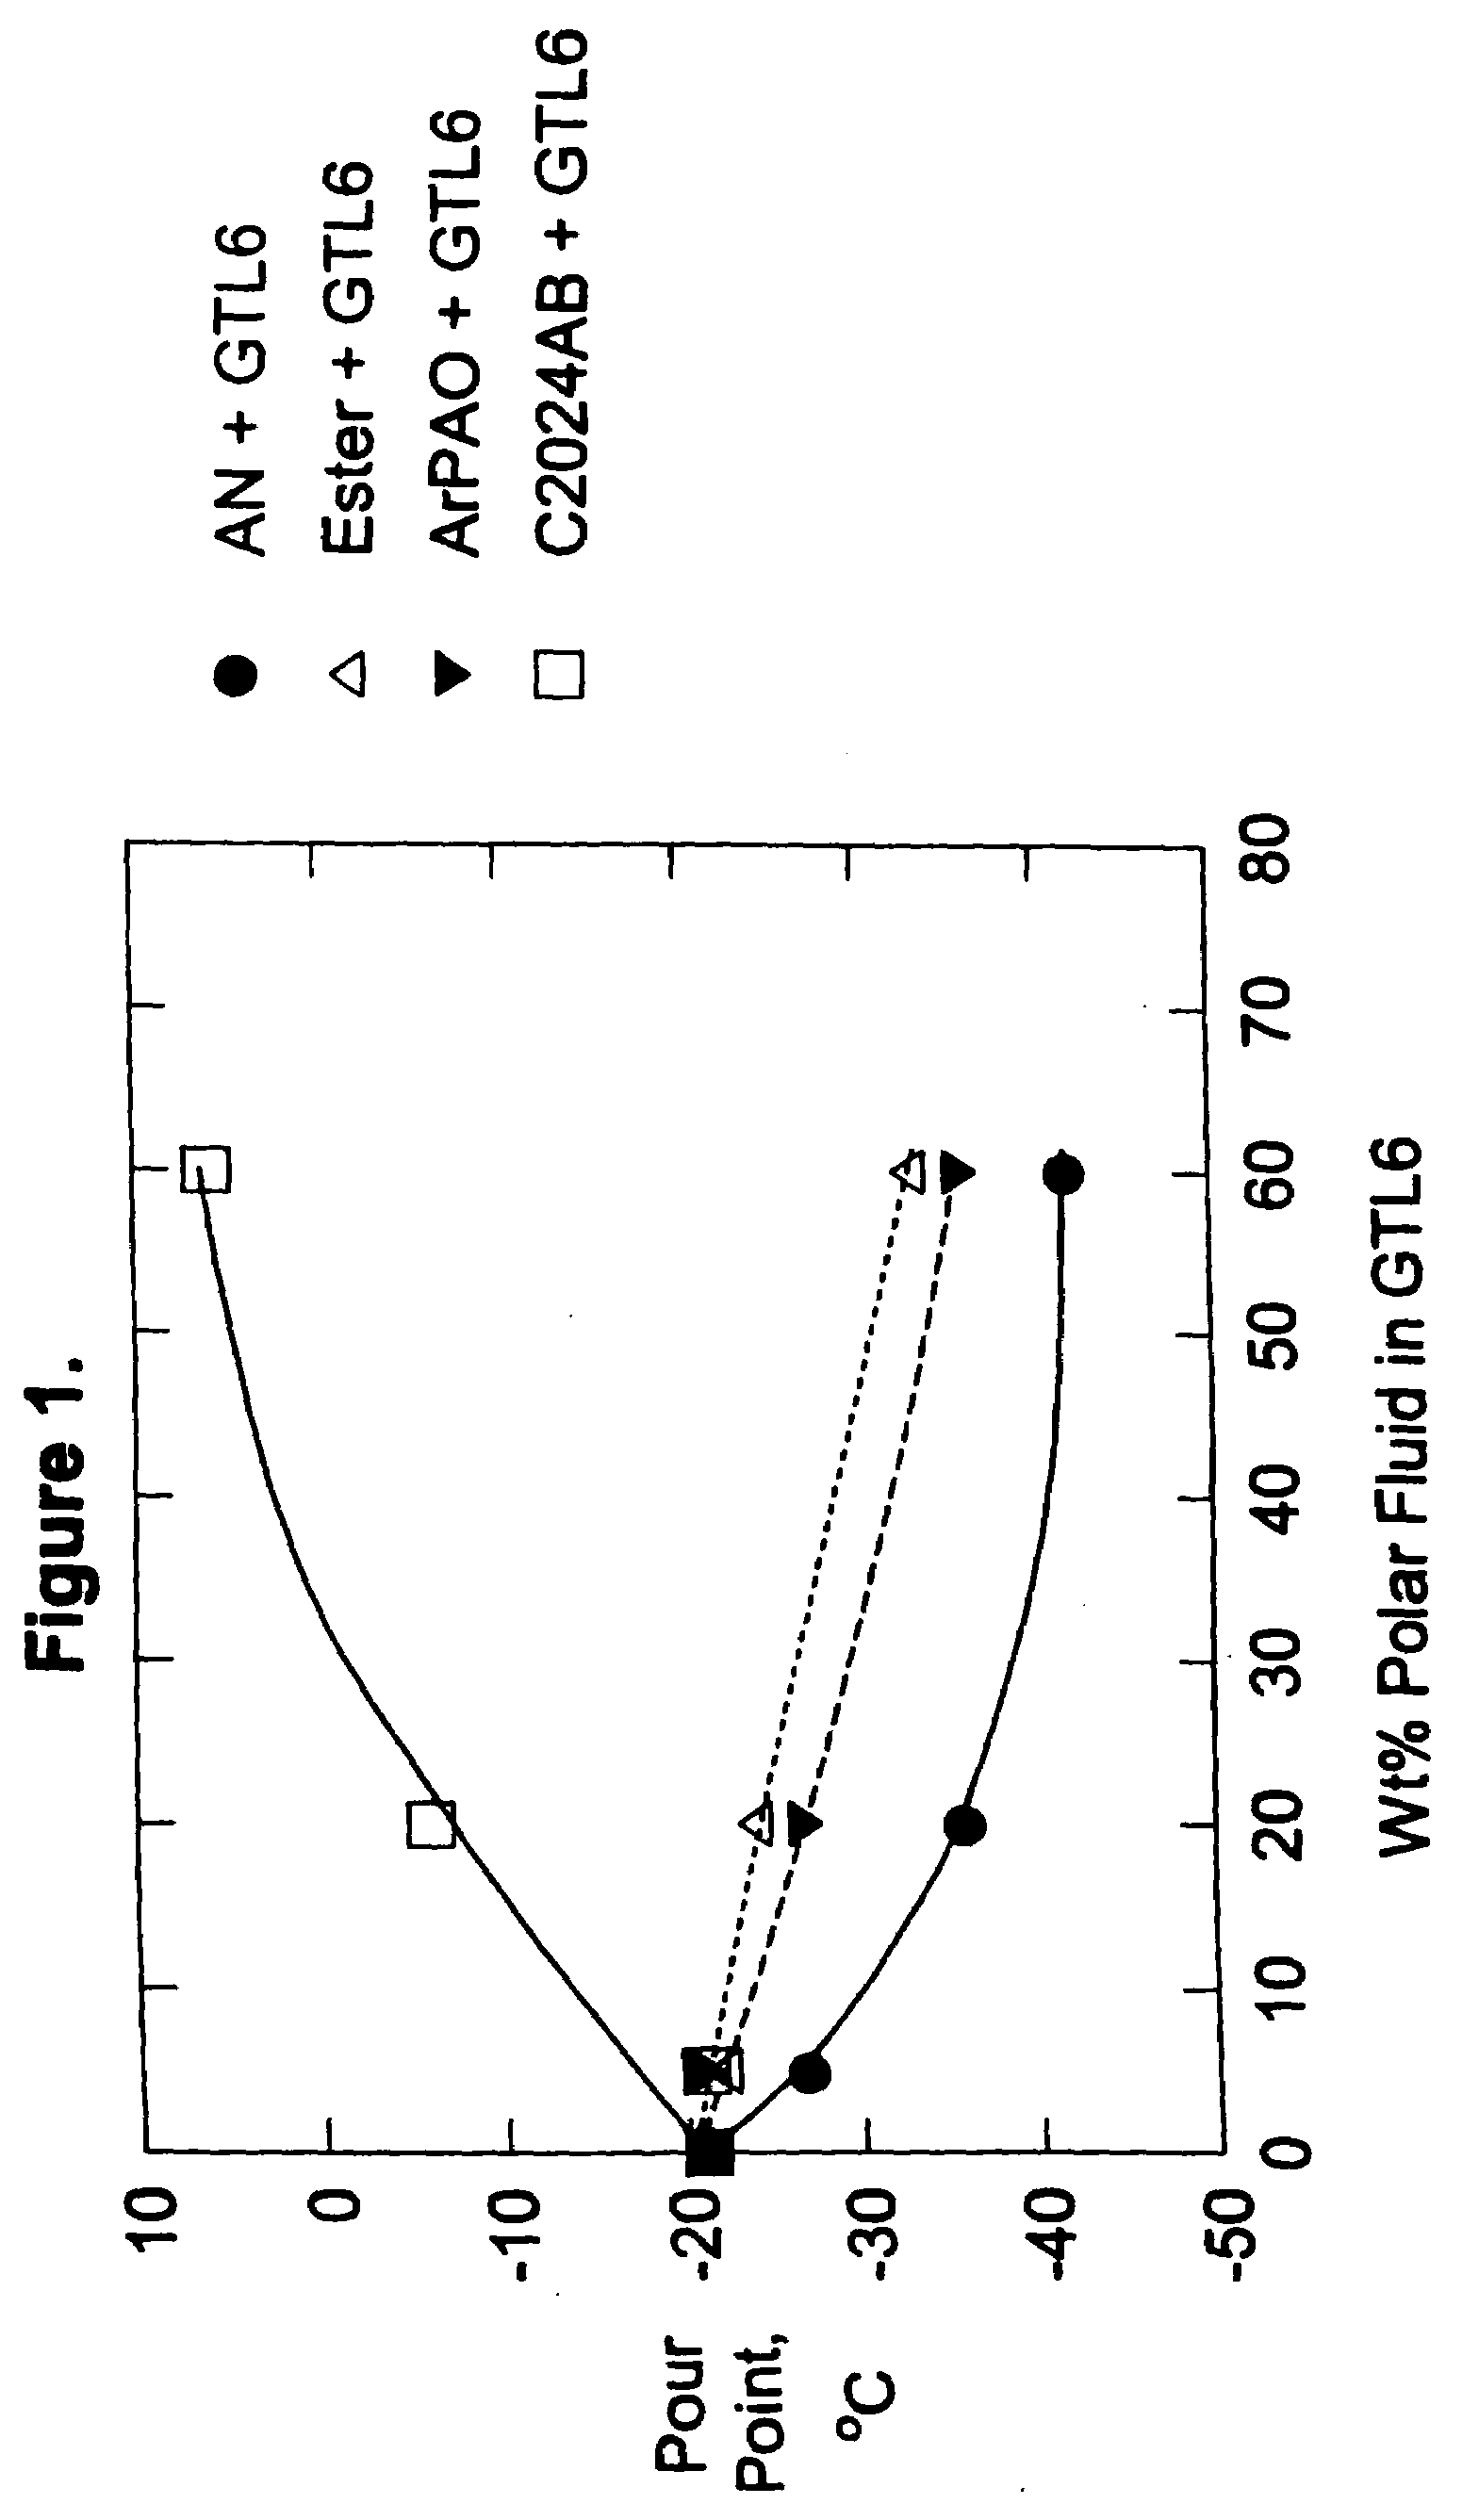 Lubricating oil compositions having improved low temperature properties